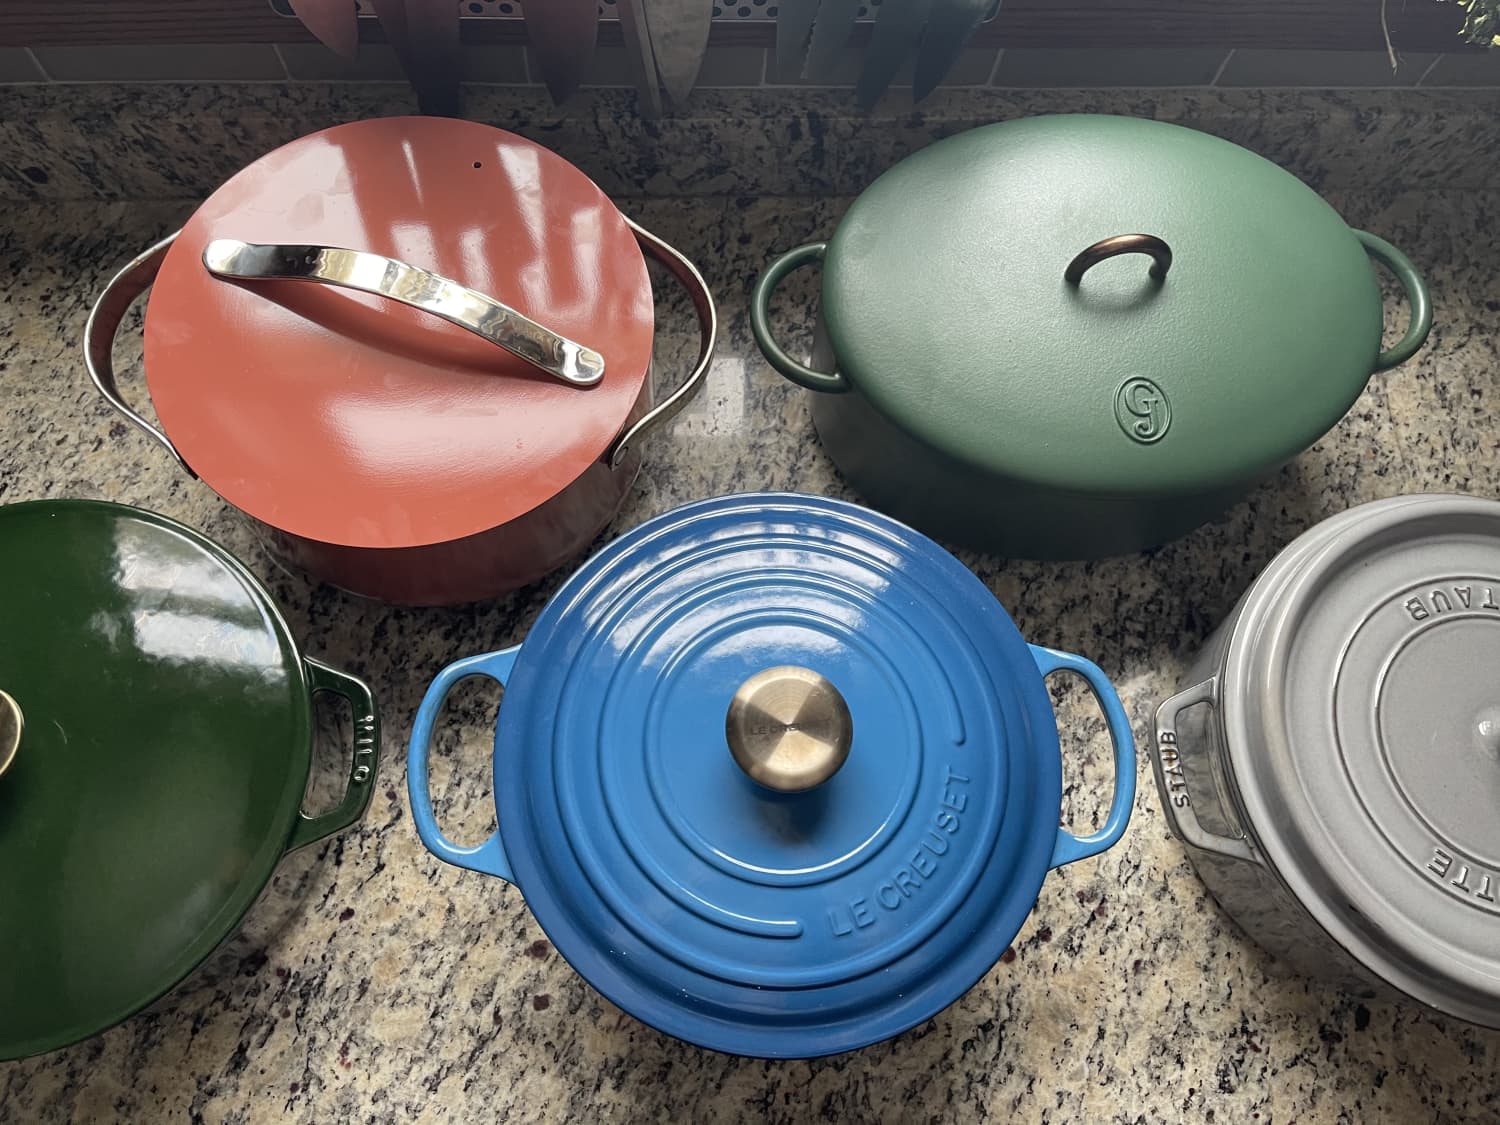 Le Creuset Review 2021: We Tested Its Classic Dutch Oven and 6